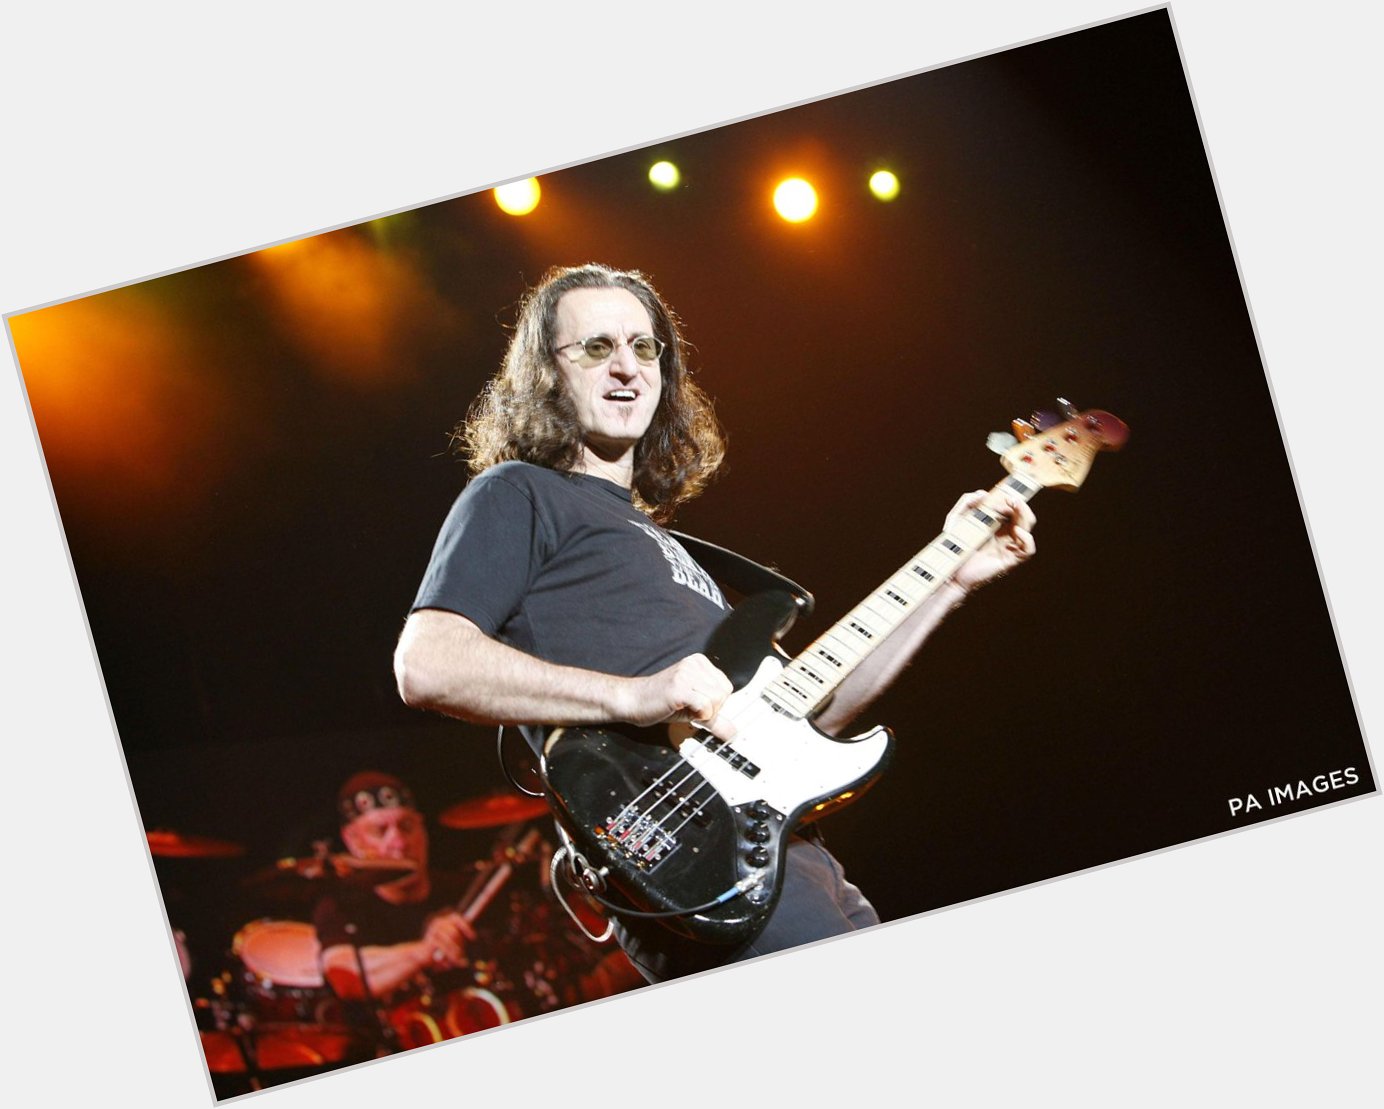 On a timeless wavelength, bearing a gift beyond price...Geddy Lee was born today in 1953. Happy Birthday! Many more! 